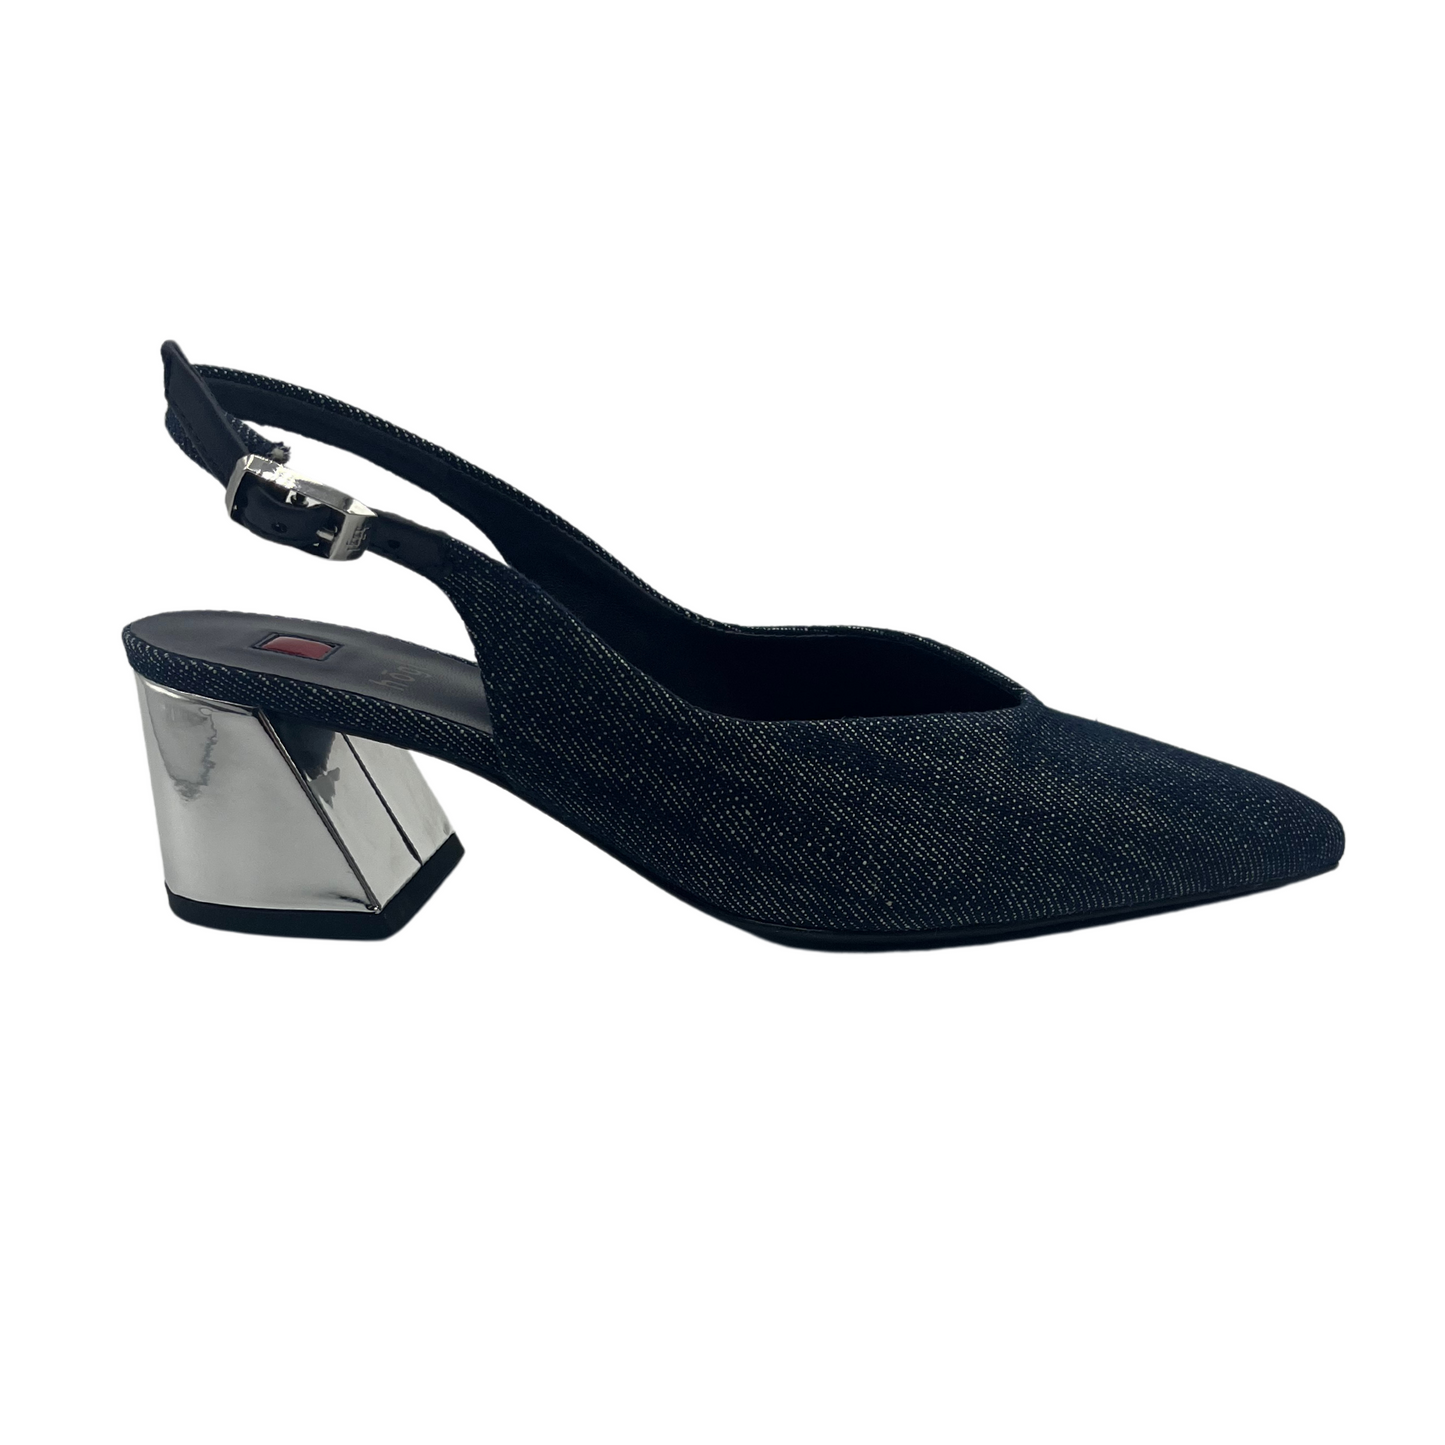 Right facing view of jean fabric pump with sling back strap, pointed toe and silver flared heel.